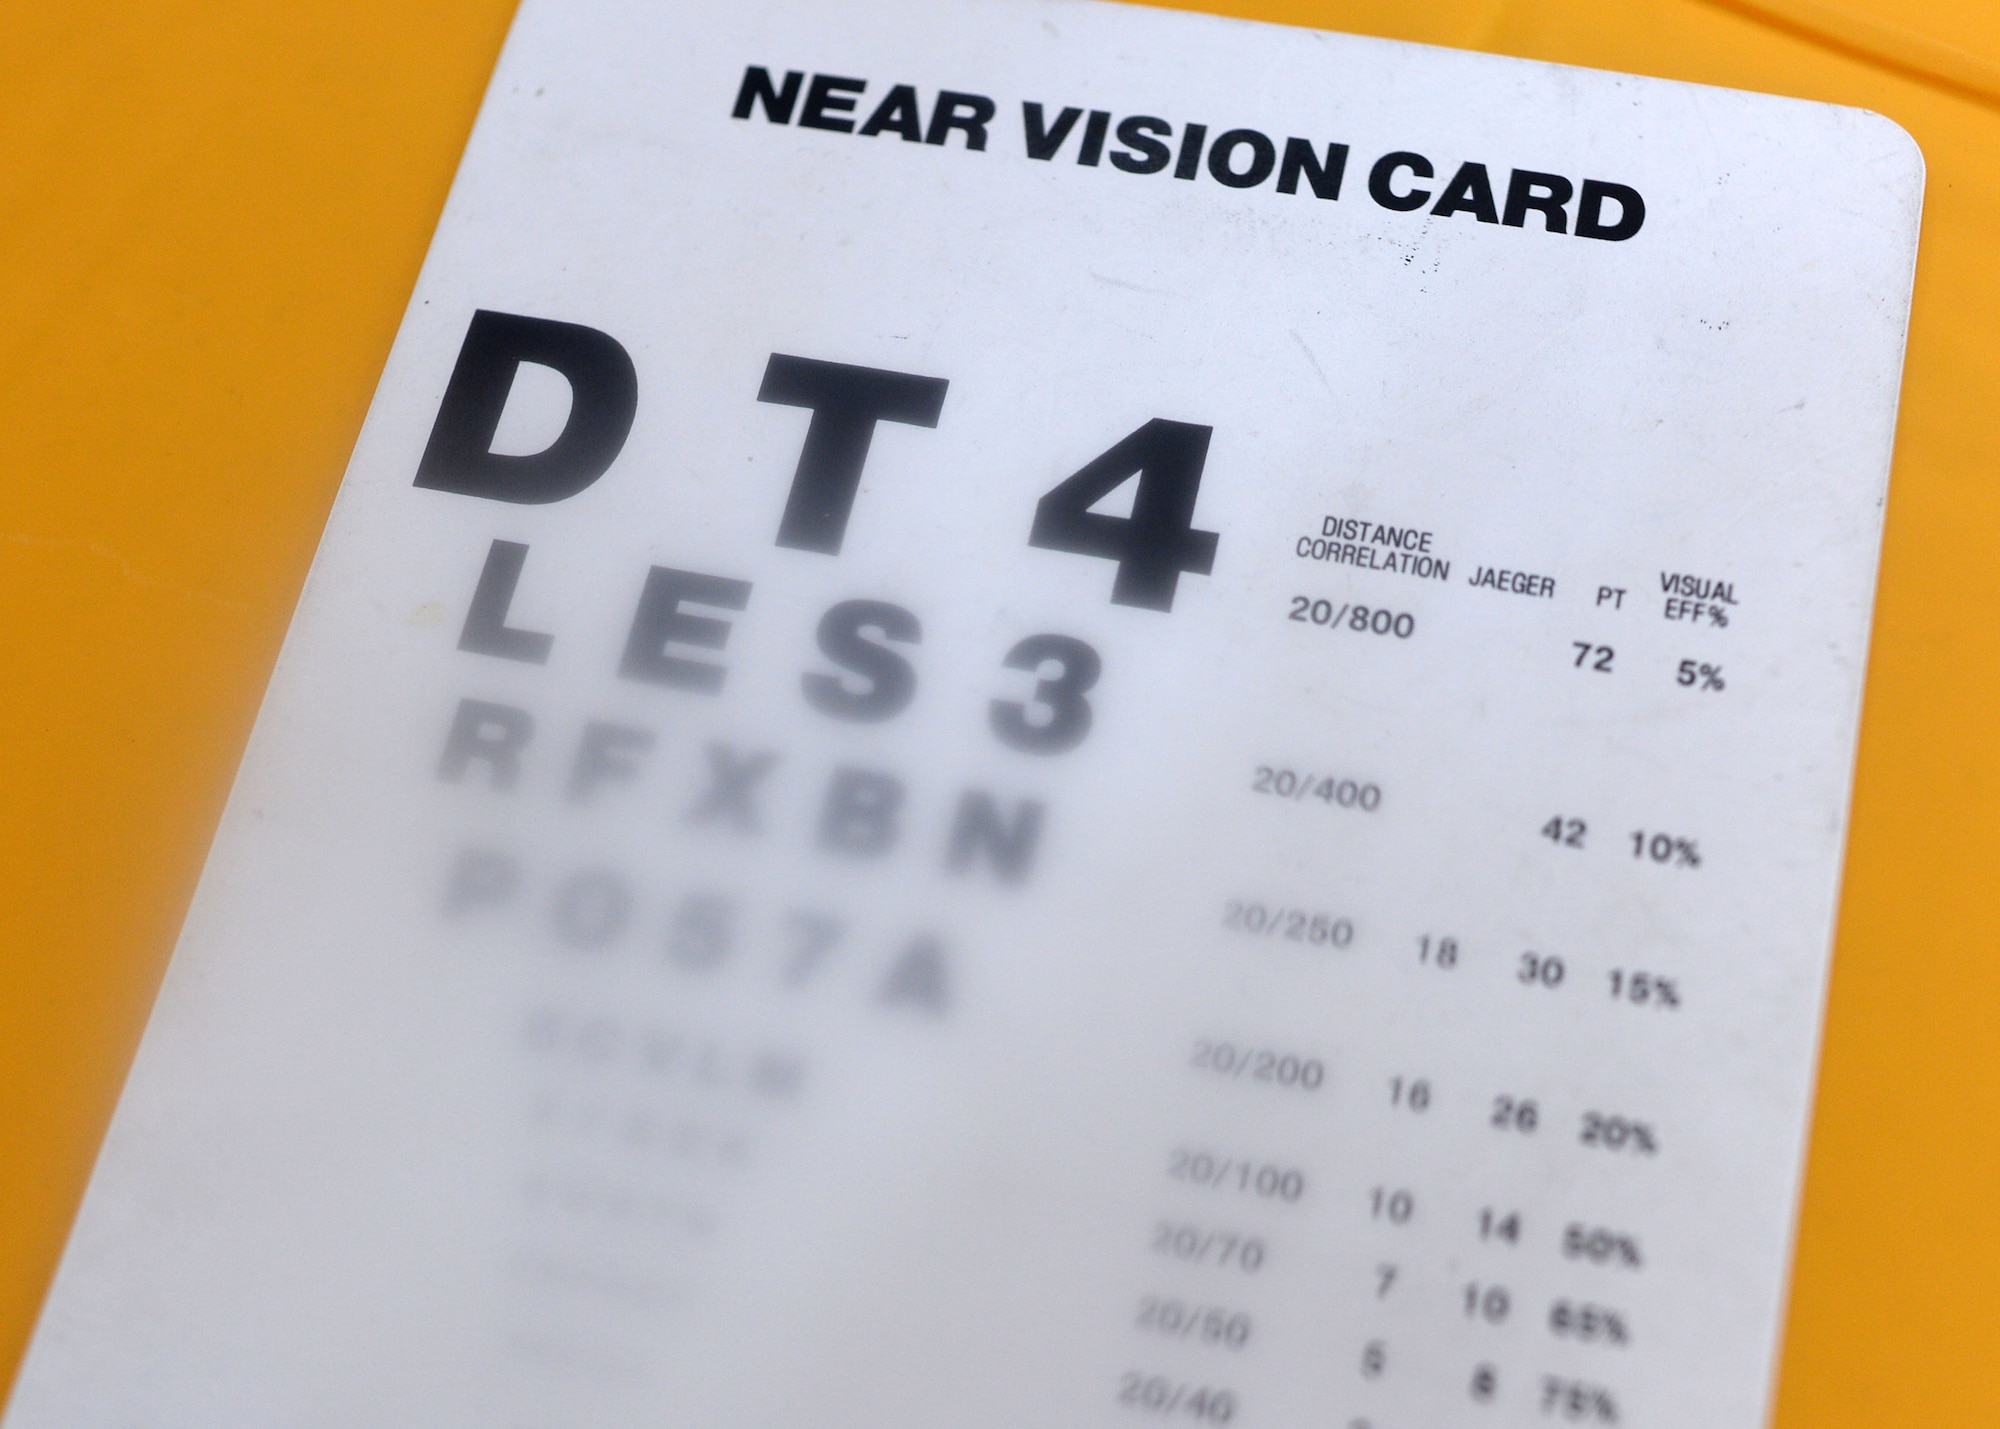 A near-vision card that tests visual acuity rests on a table at the optometry booth at 52nd Medical Group Fall Harvest Health Fair Nov. 5, 2014.  The blurred spot in the middle of the image is from a lens that simulates macular degeneration, a deterioration of the eye thought to be due by aging. The symptoms are usually blurriness in the center of vision with the peripherals unaffected. (U.S. Air Force photo by Staff Sgt. Daryl Knee/Released)